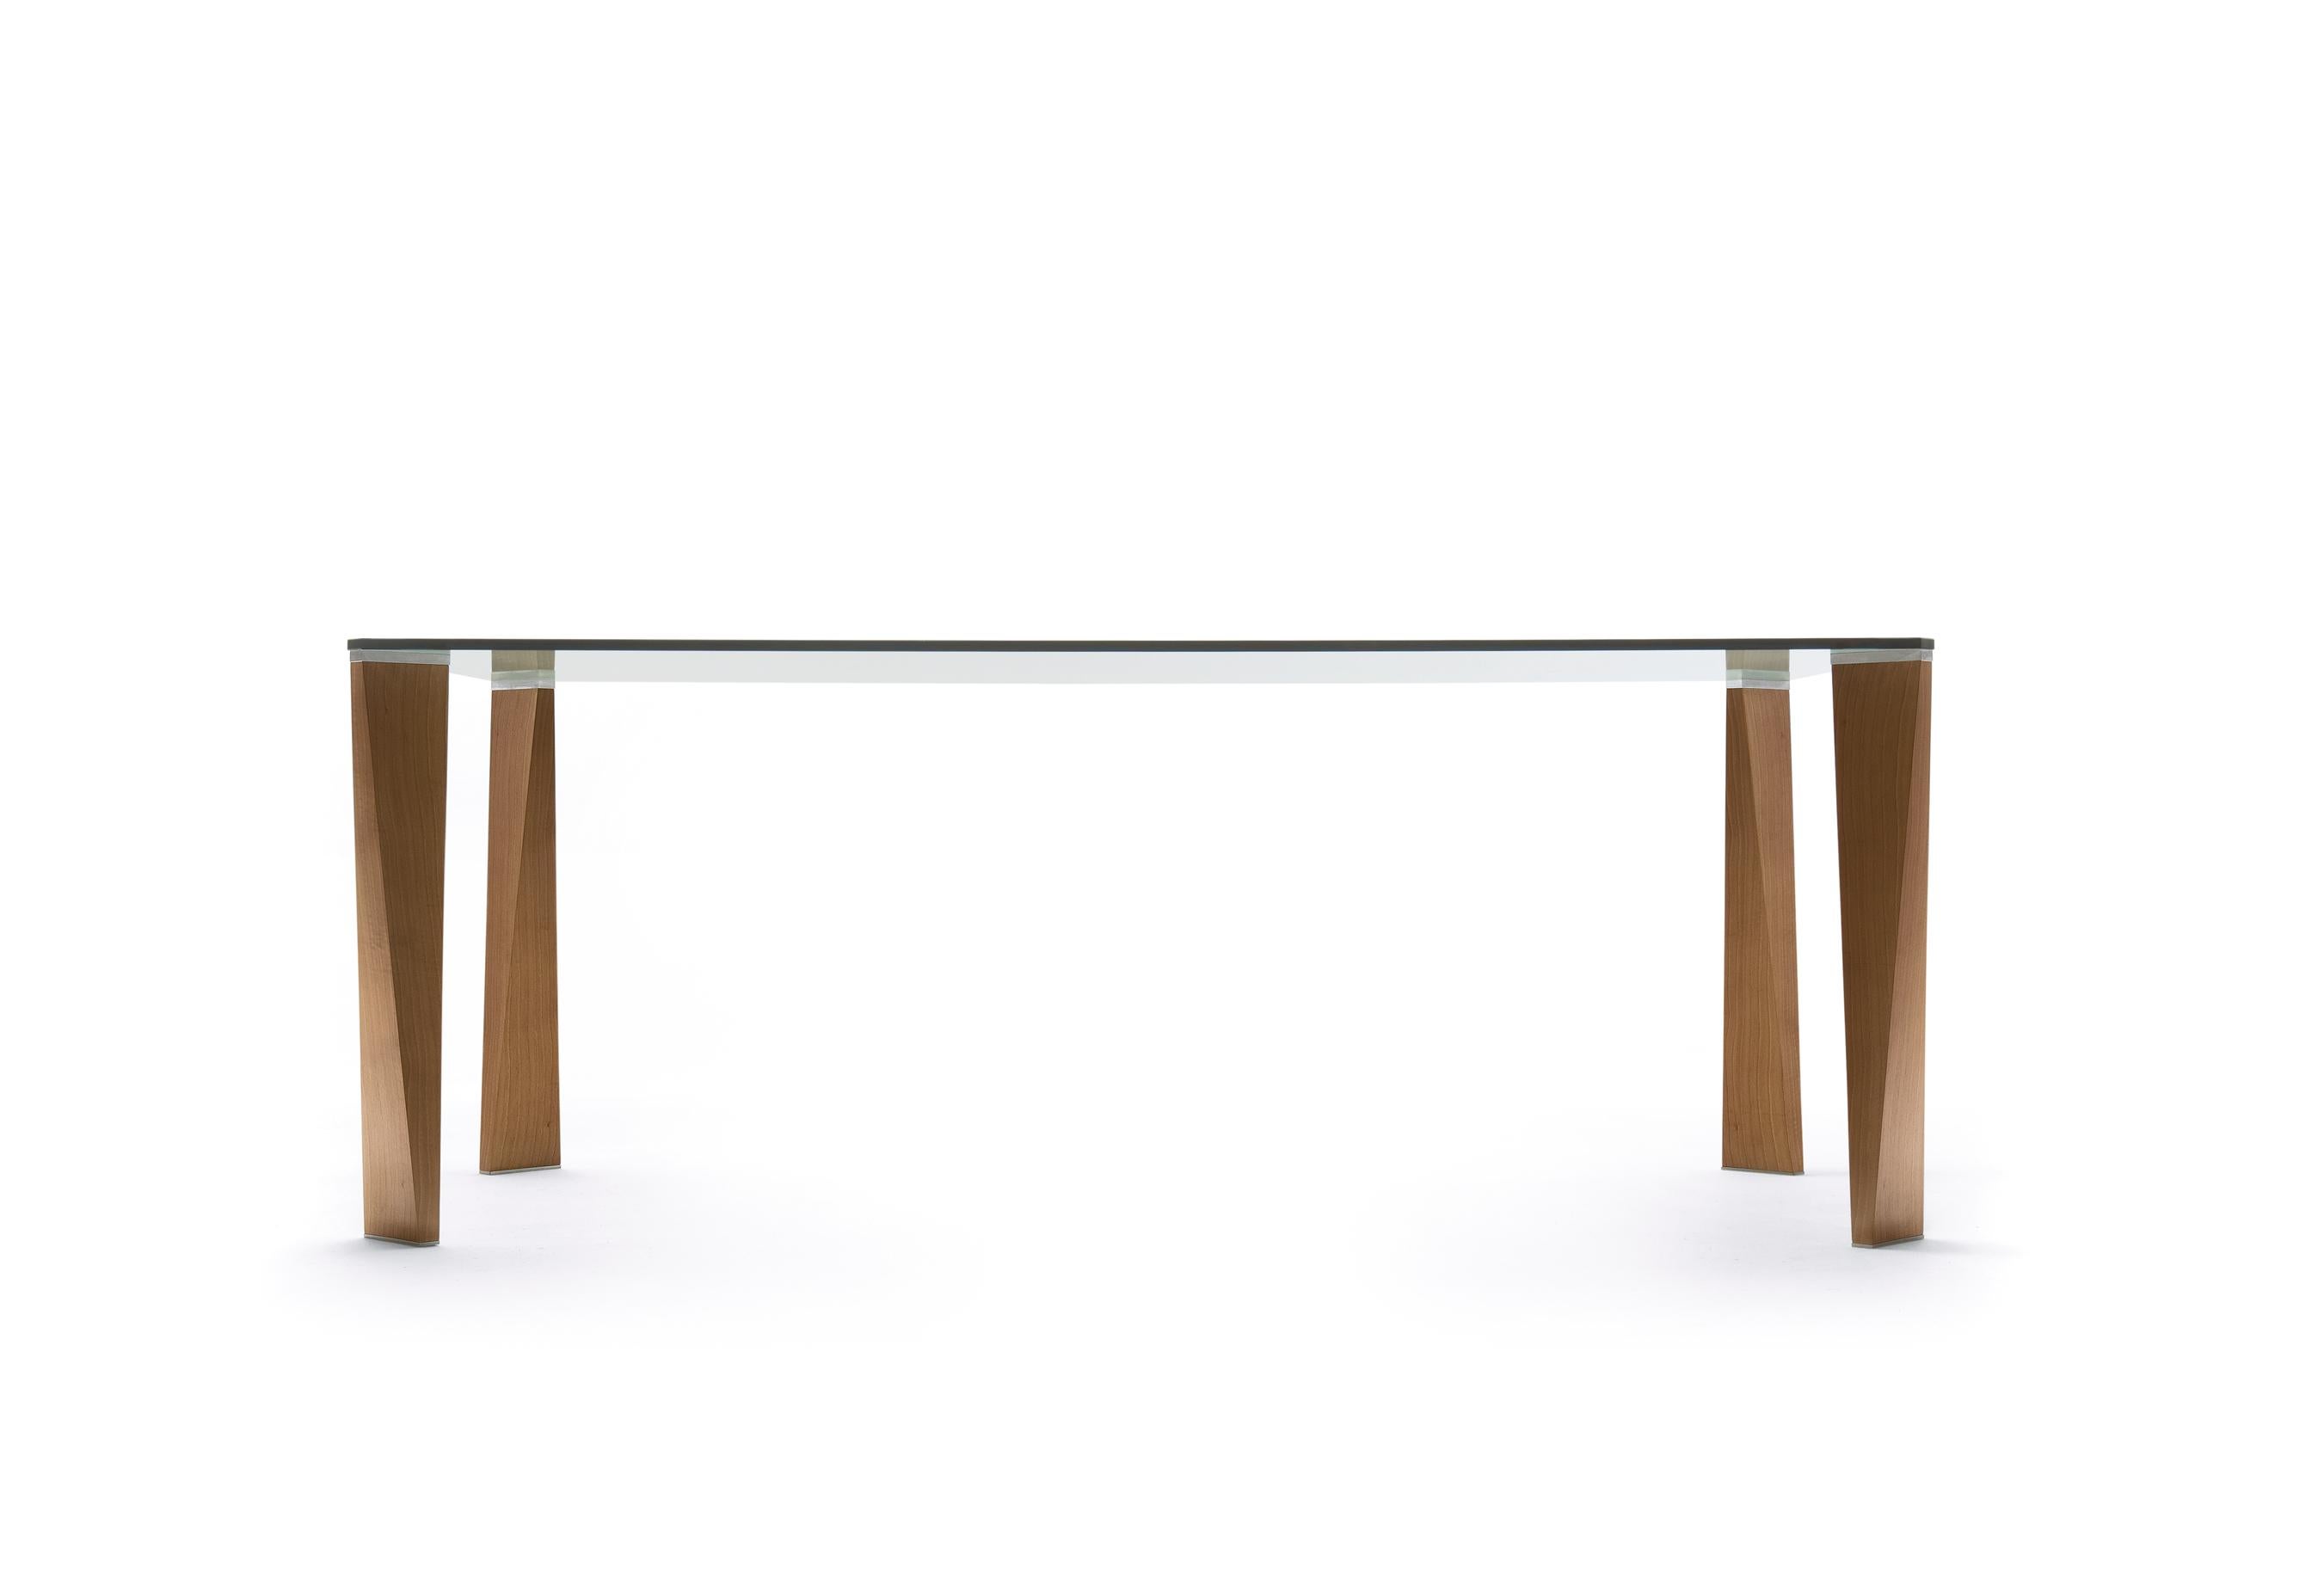 Dining table with top in tempered clear glass. Legs in solid veneered wood and supports in steel.